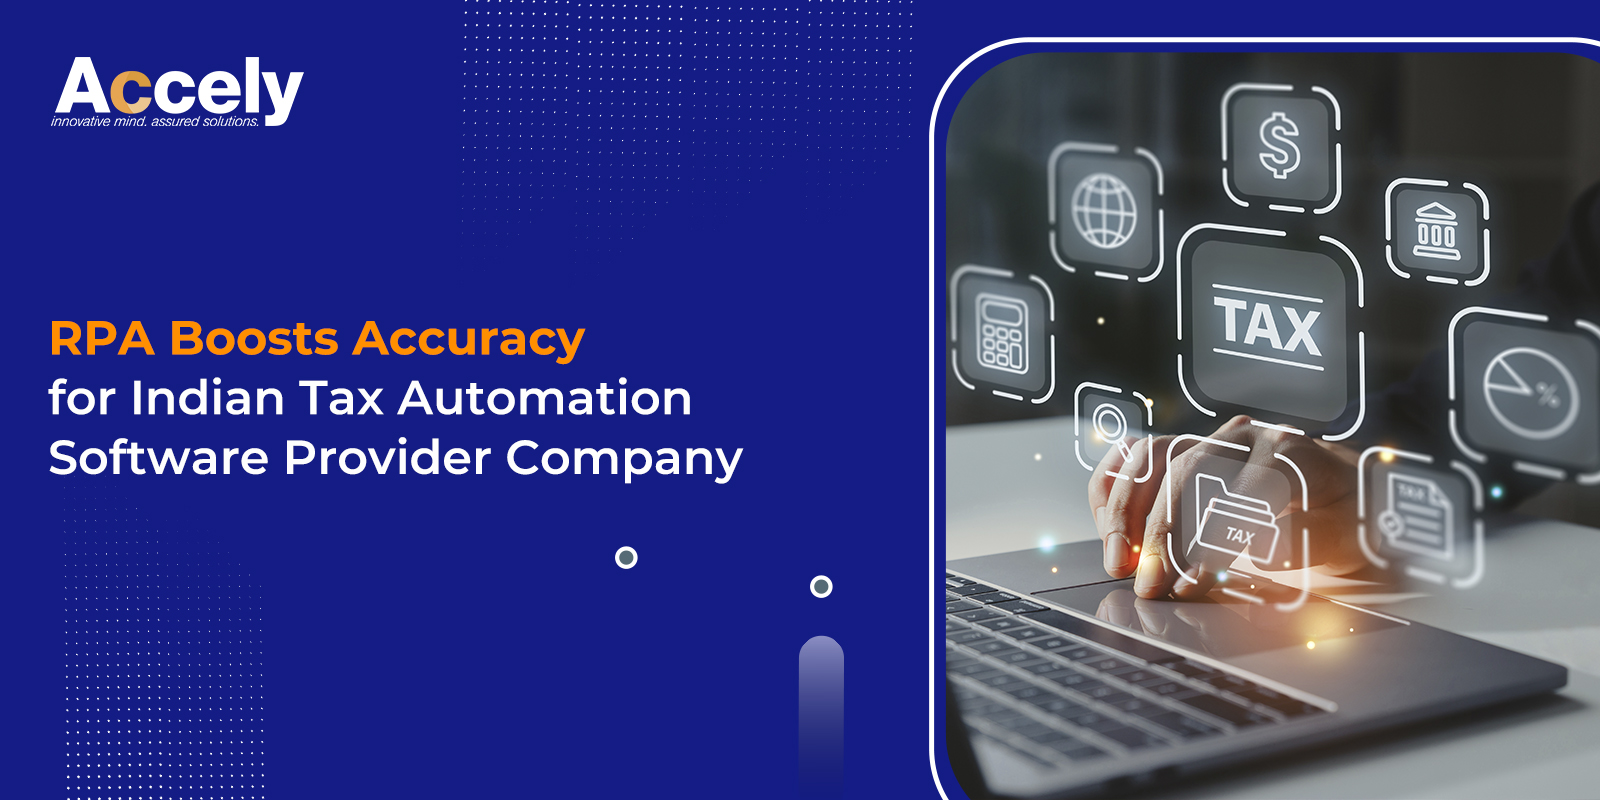 India's Leading Provider of Tax Automation Software Leverages RPA to Drive Efficiency